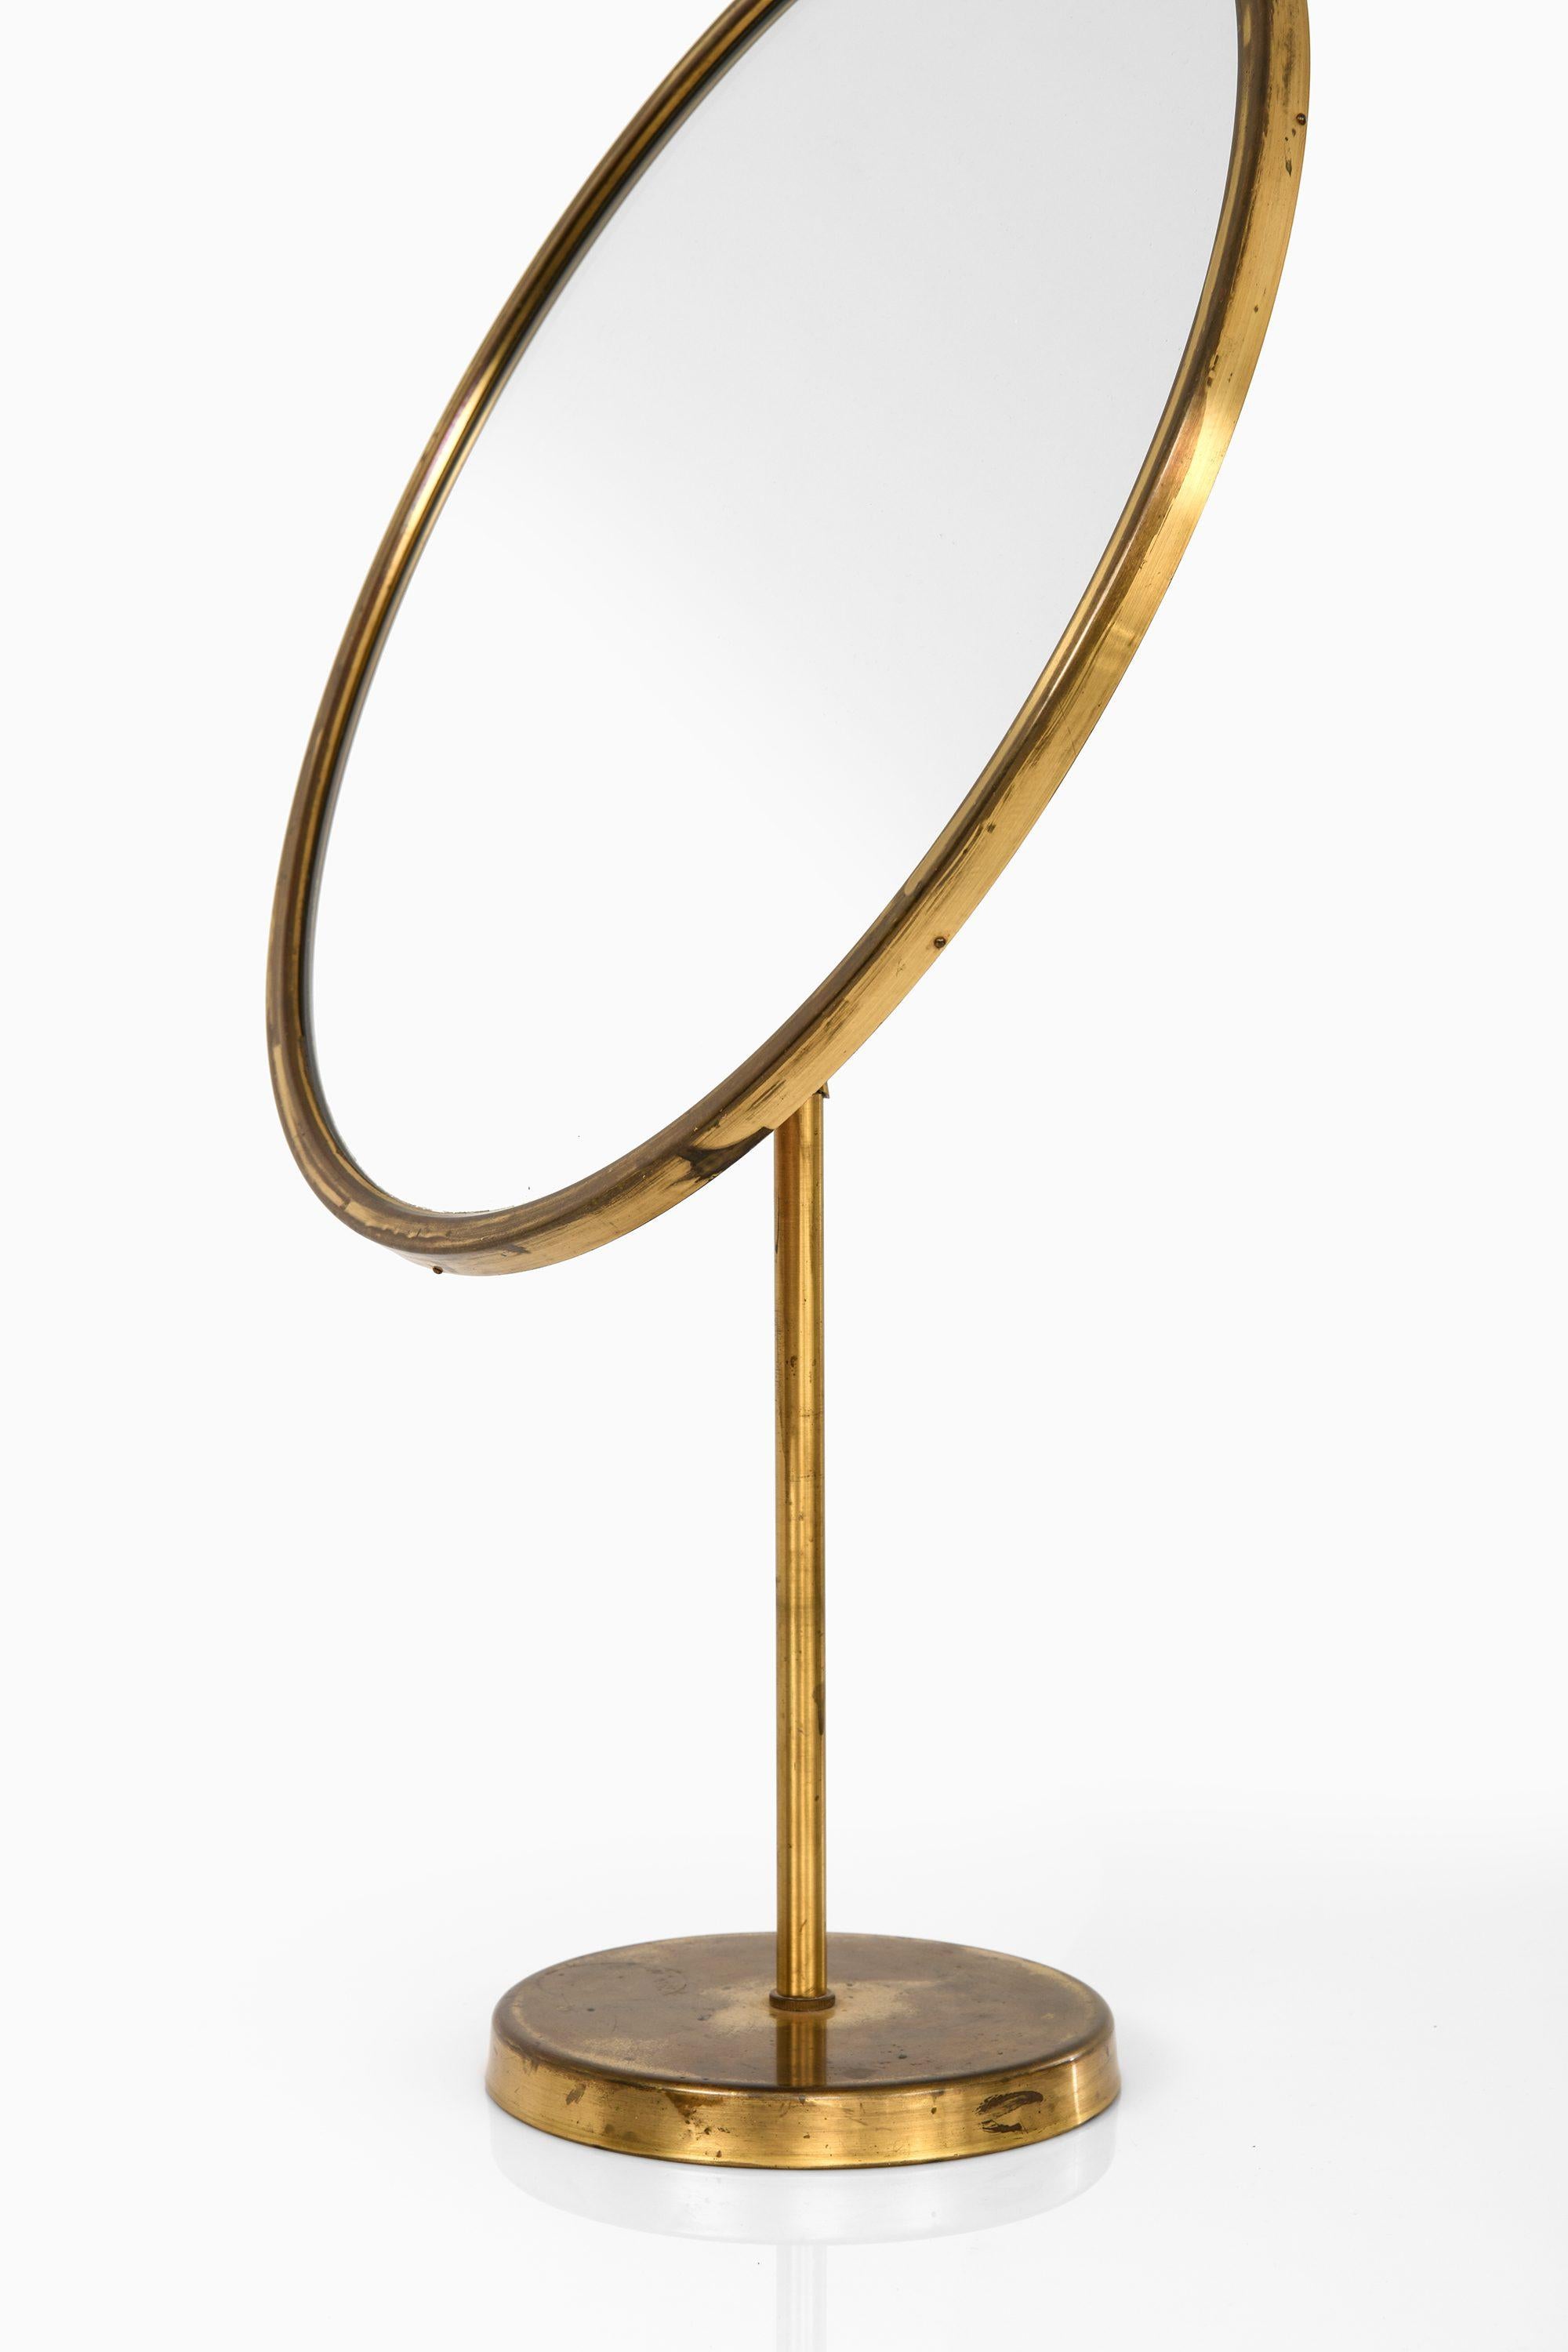 Swedish Table Mirror in Brass and Teak by Josef Frank, 1950's For Sale